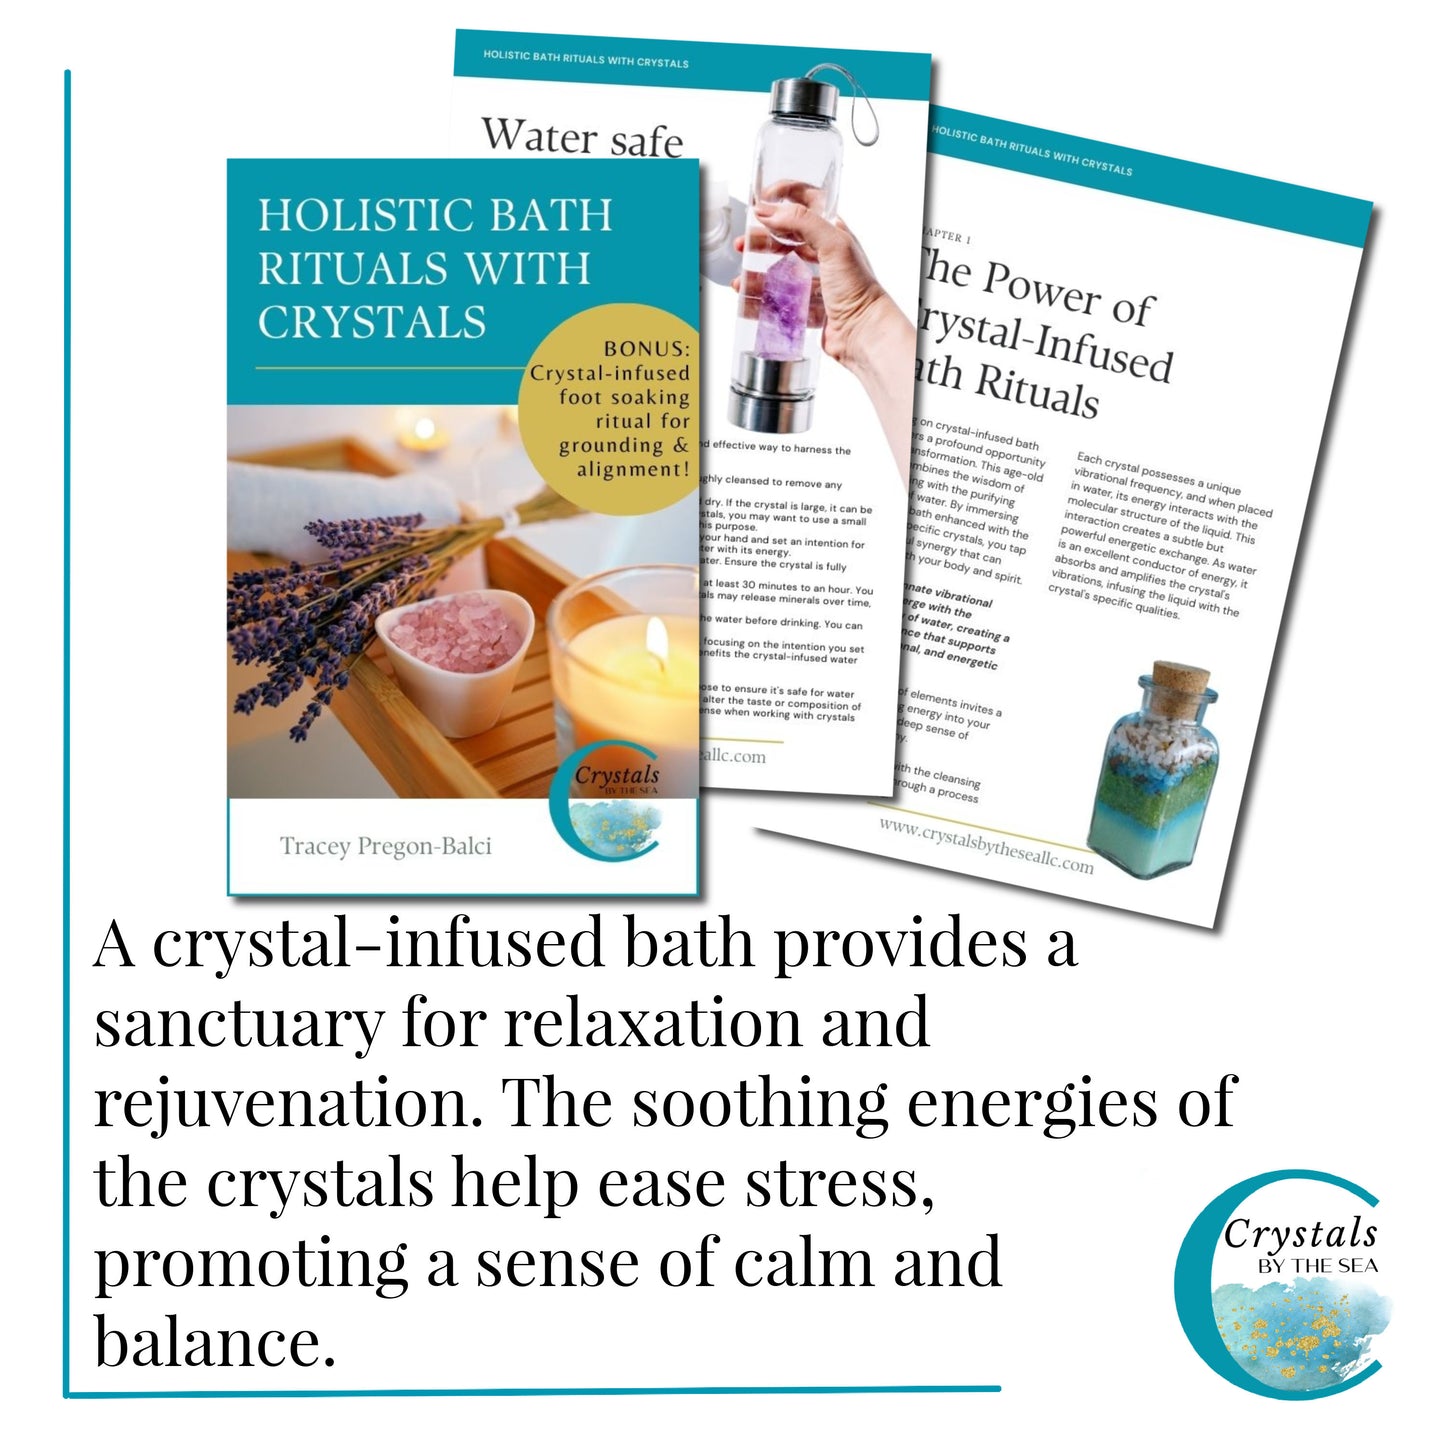 Your Guide to Immediate Stress Relief with Crystal Infused Baths - ebook by Tracey Pregon-Balci